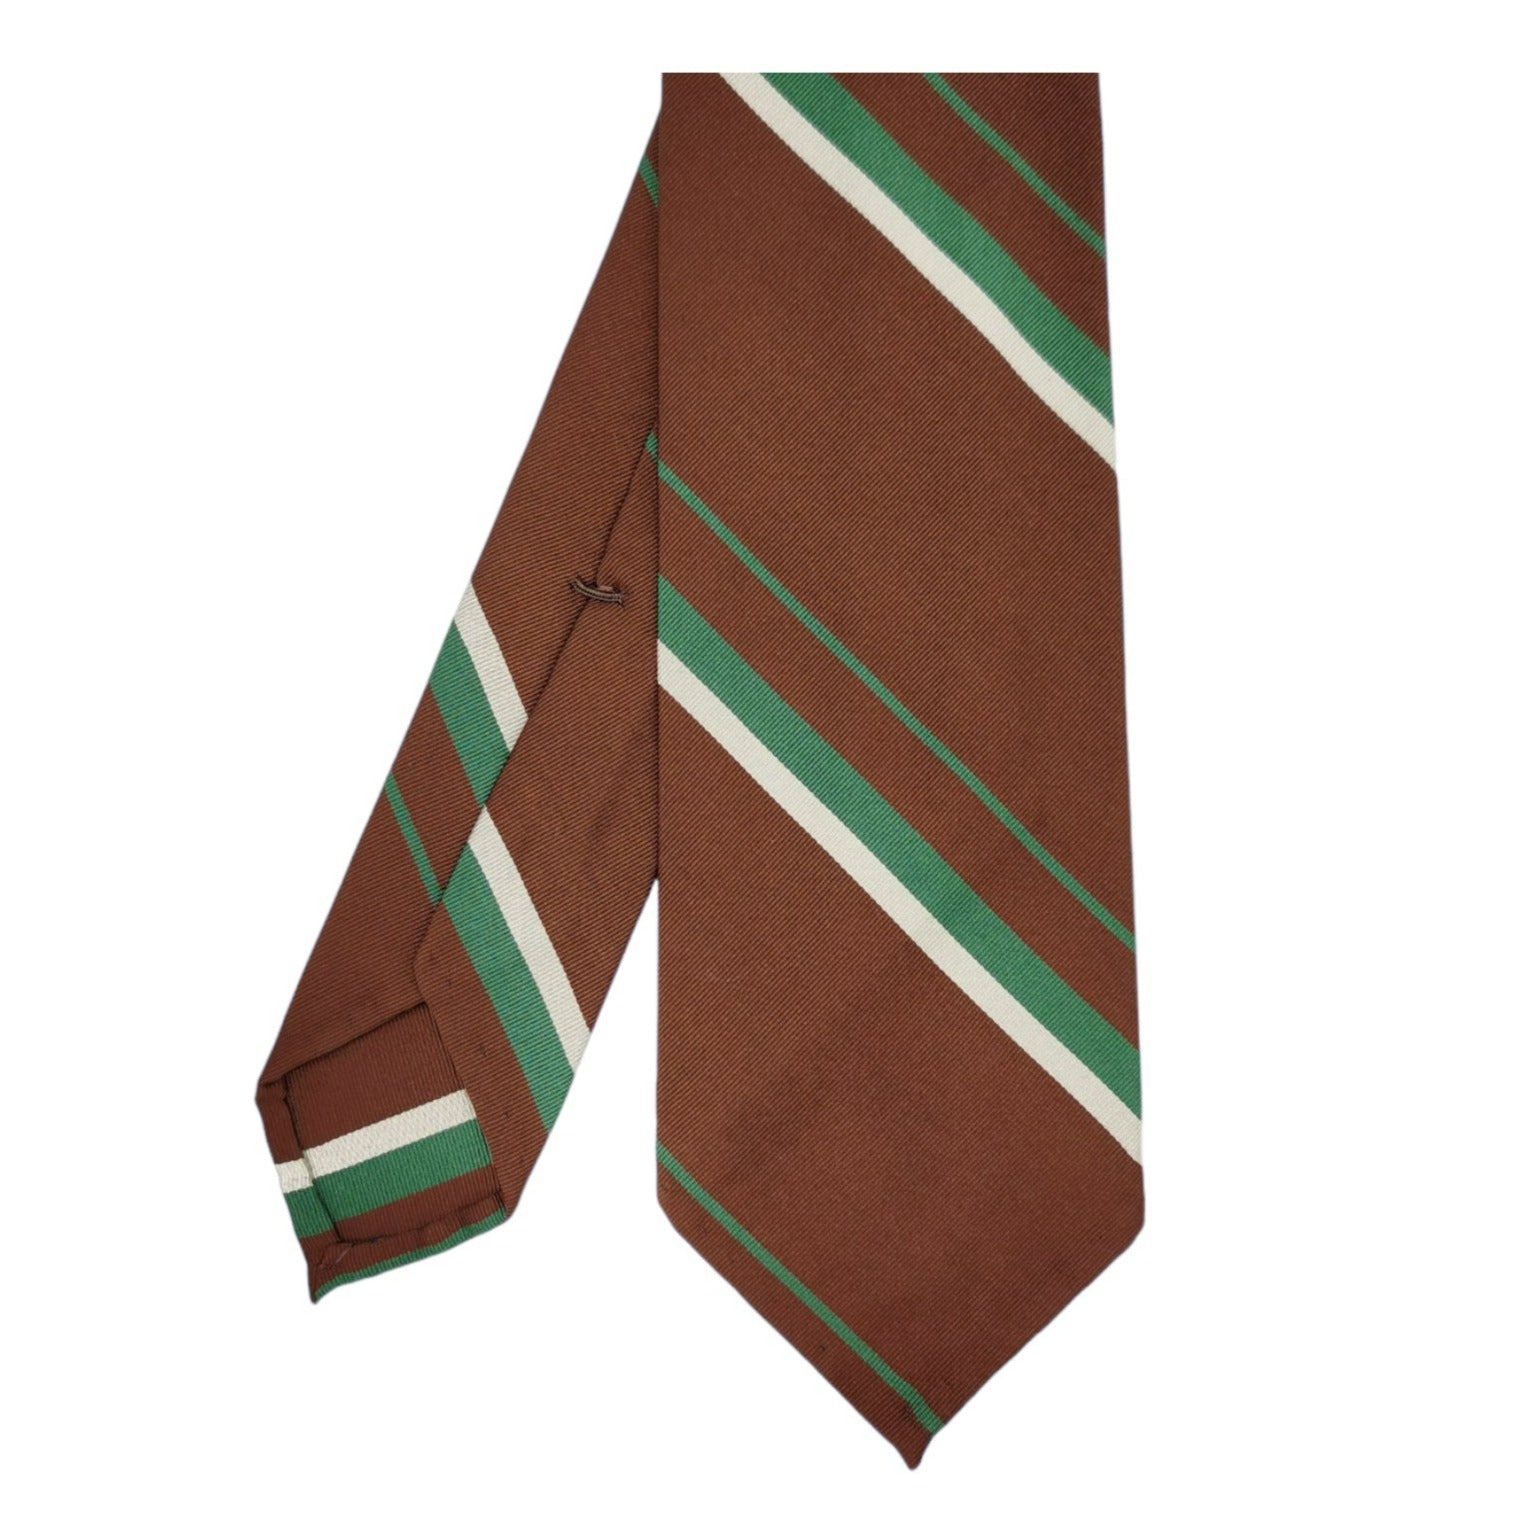 Anversa tie brown background white and green stripes